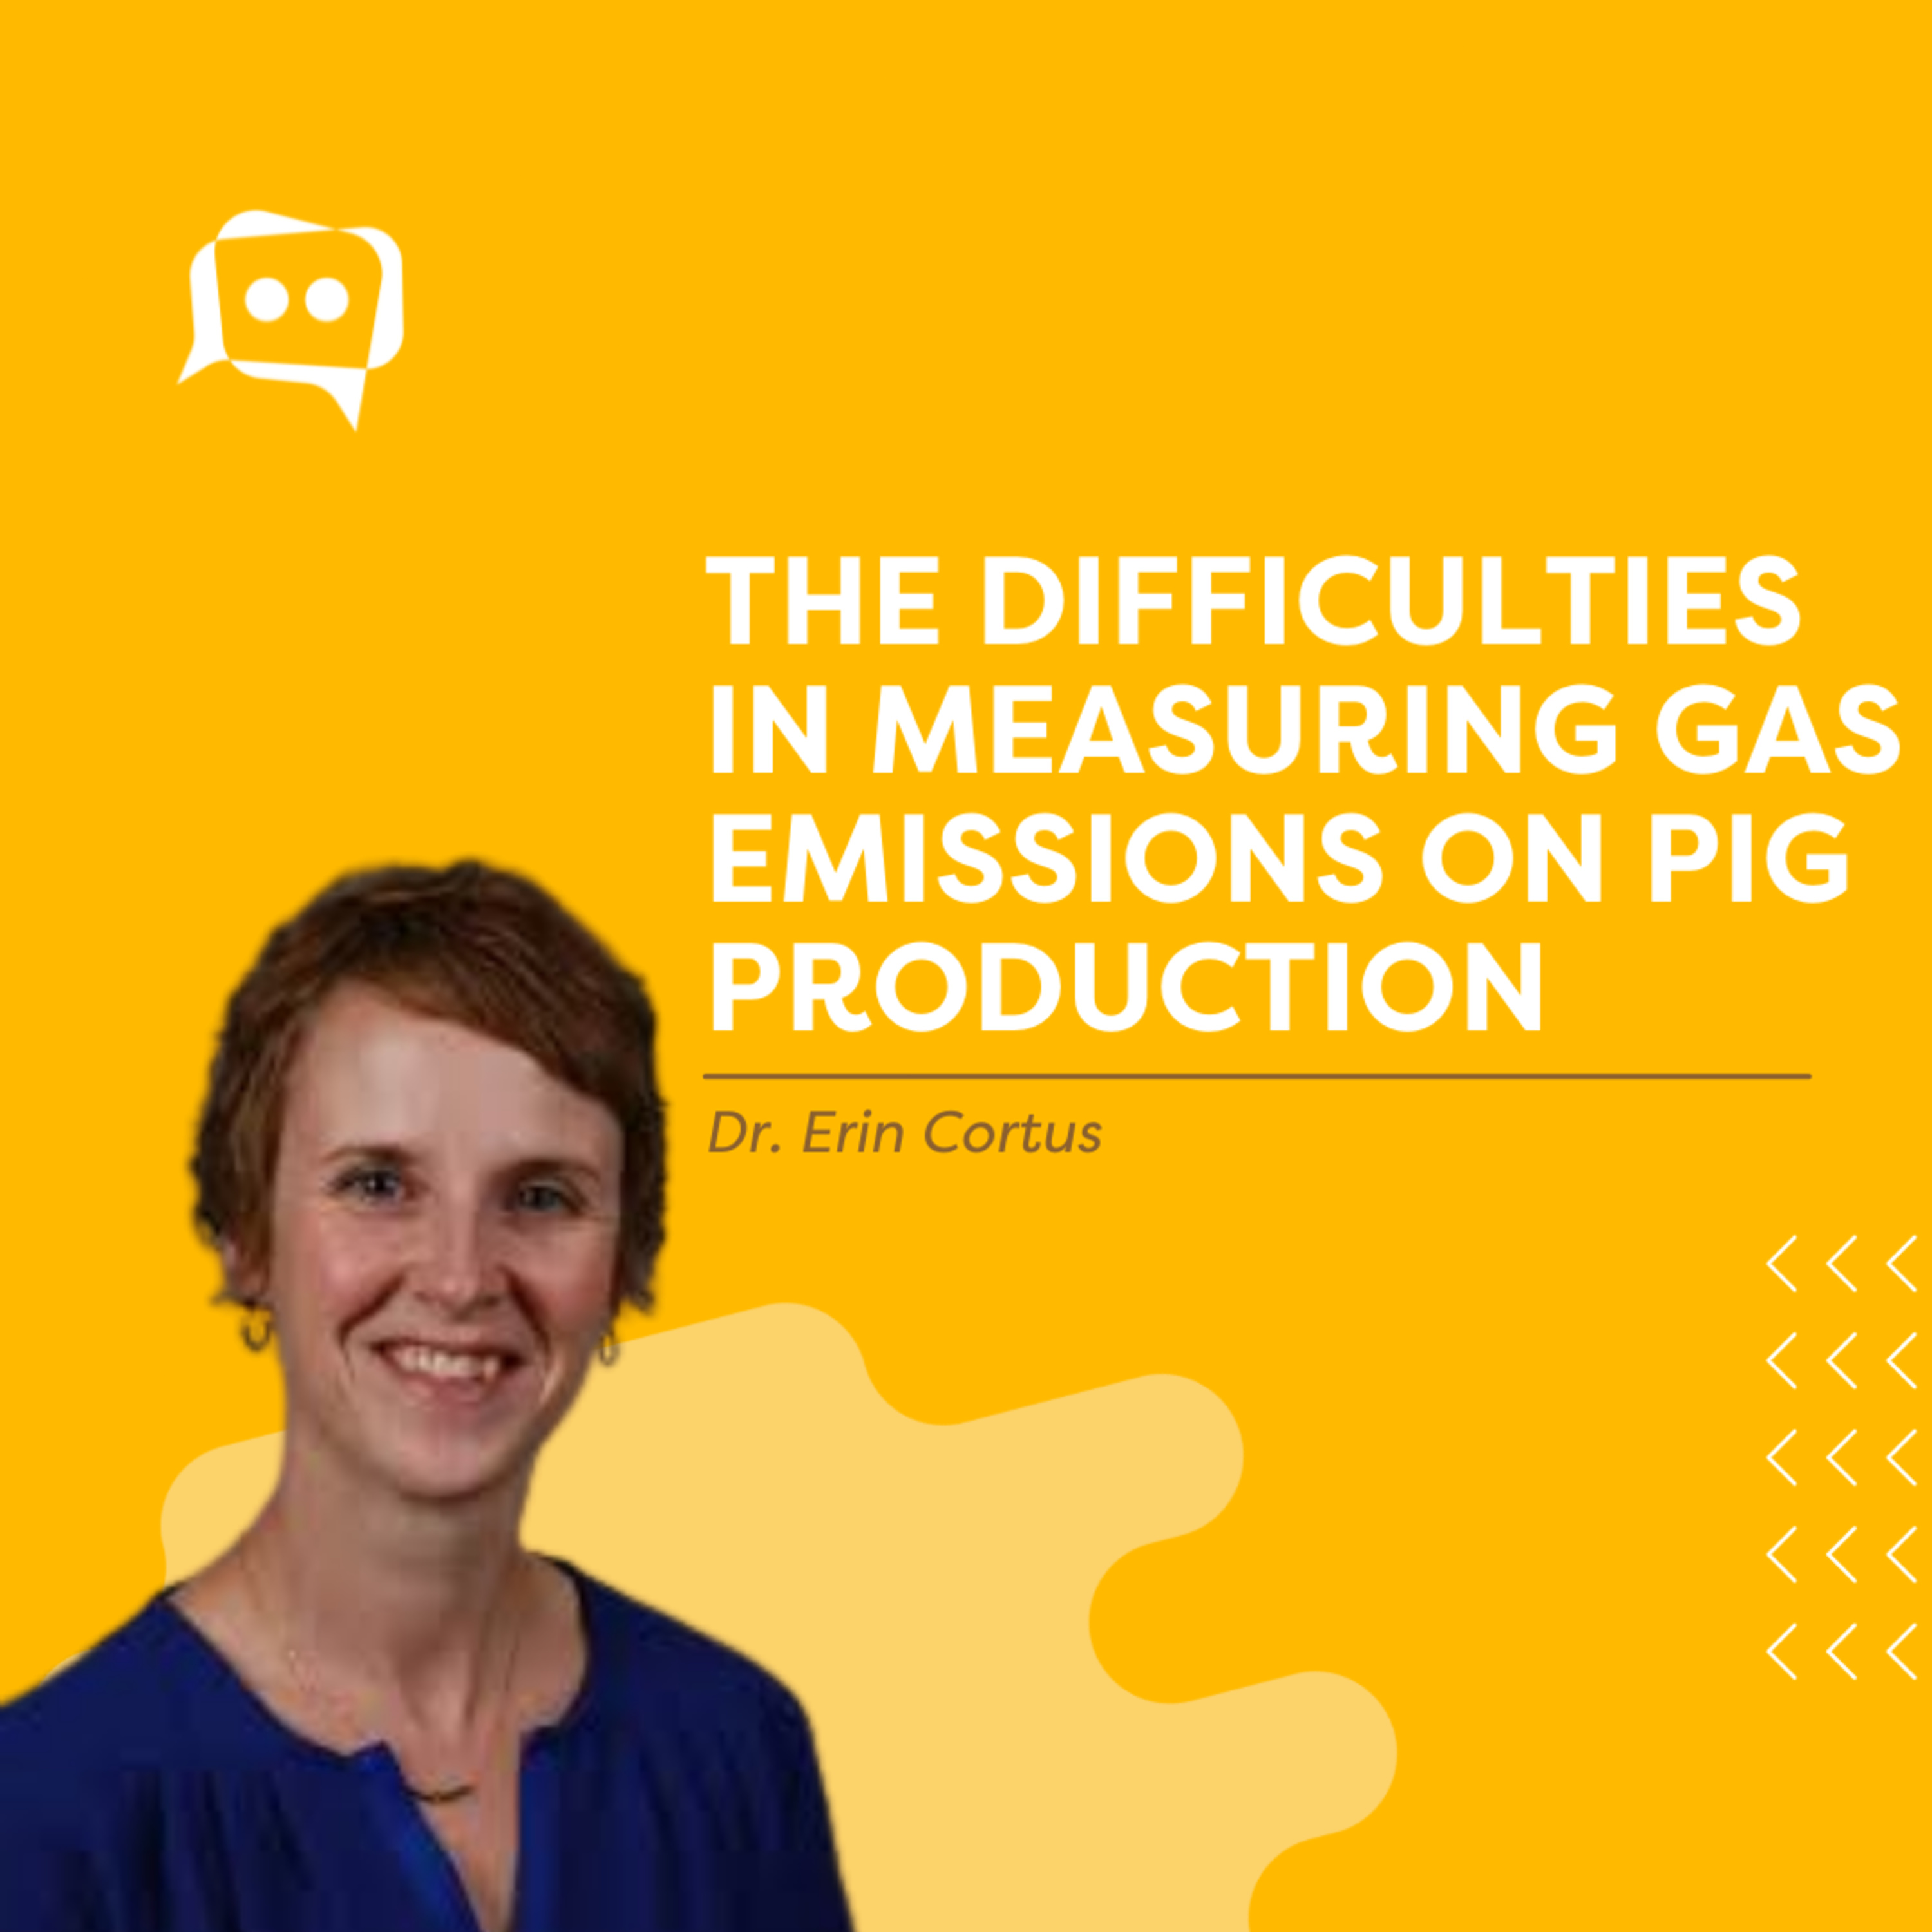 #SHORTS: The difficulties in measuring gas emissions on pig production, with Dr. Erin Cortus